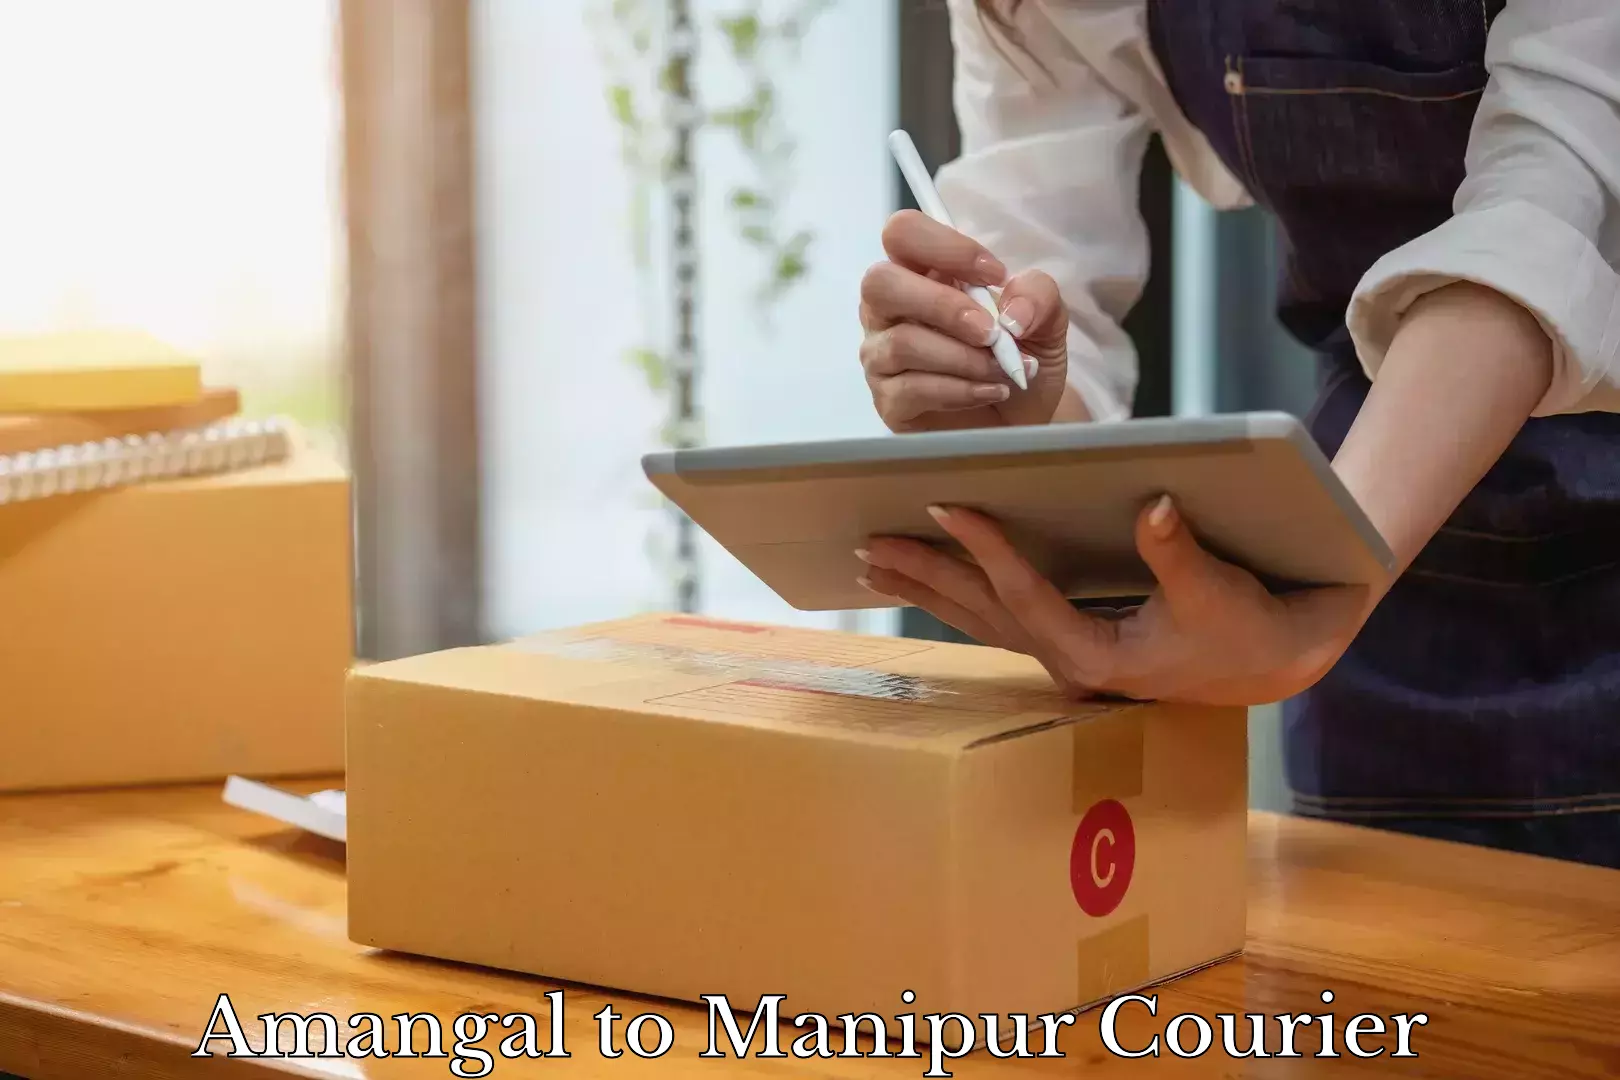 Luggage delivery app Amangal to Manipur